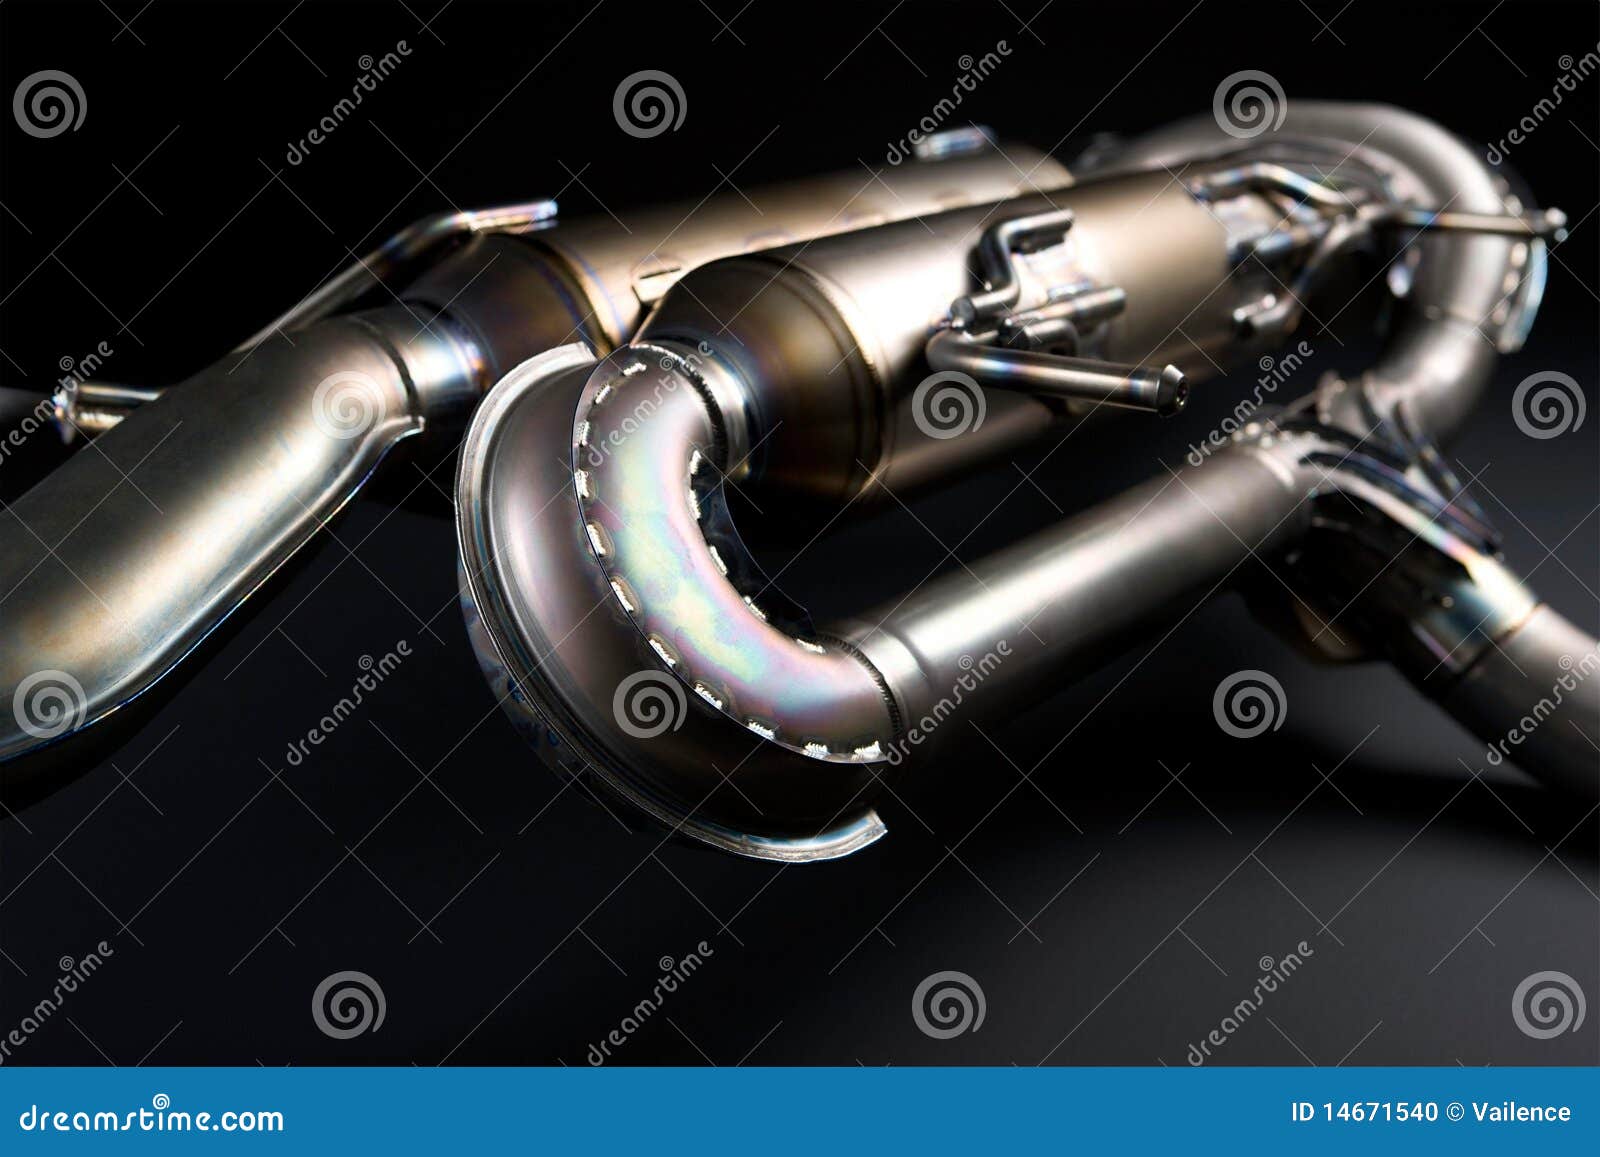 welded metal auto silencer